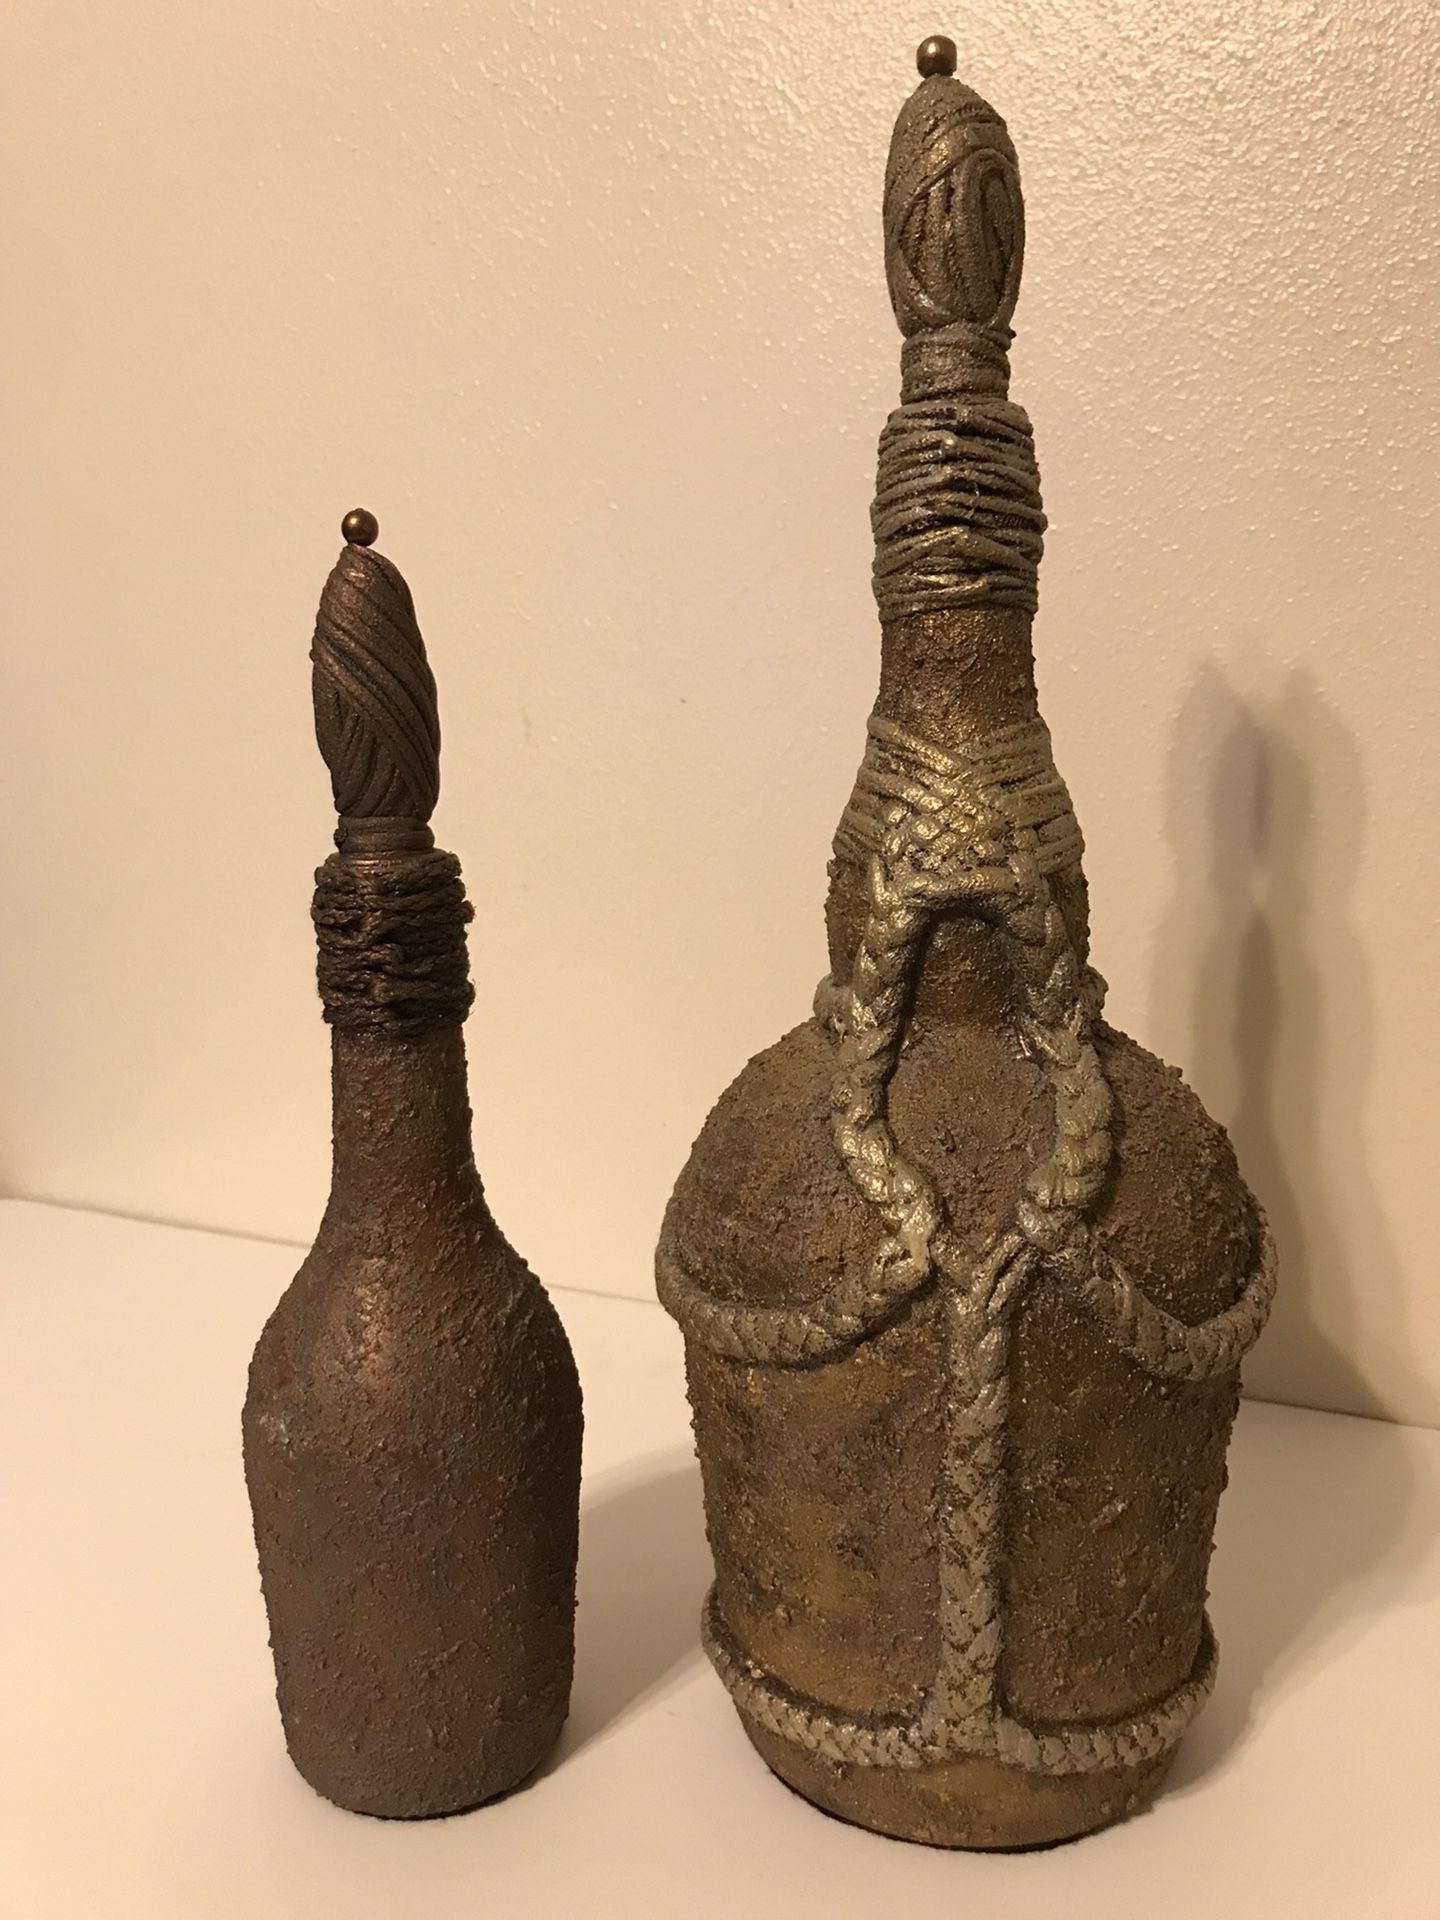 Vintage 2 Piece Decanter Bottles Hand Decorated w/ Plaster Coating & Rope